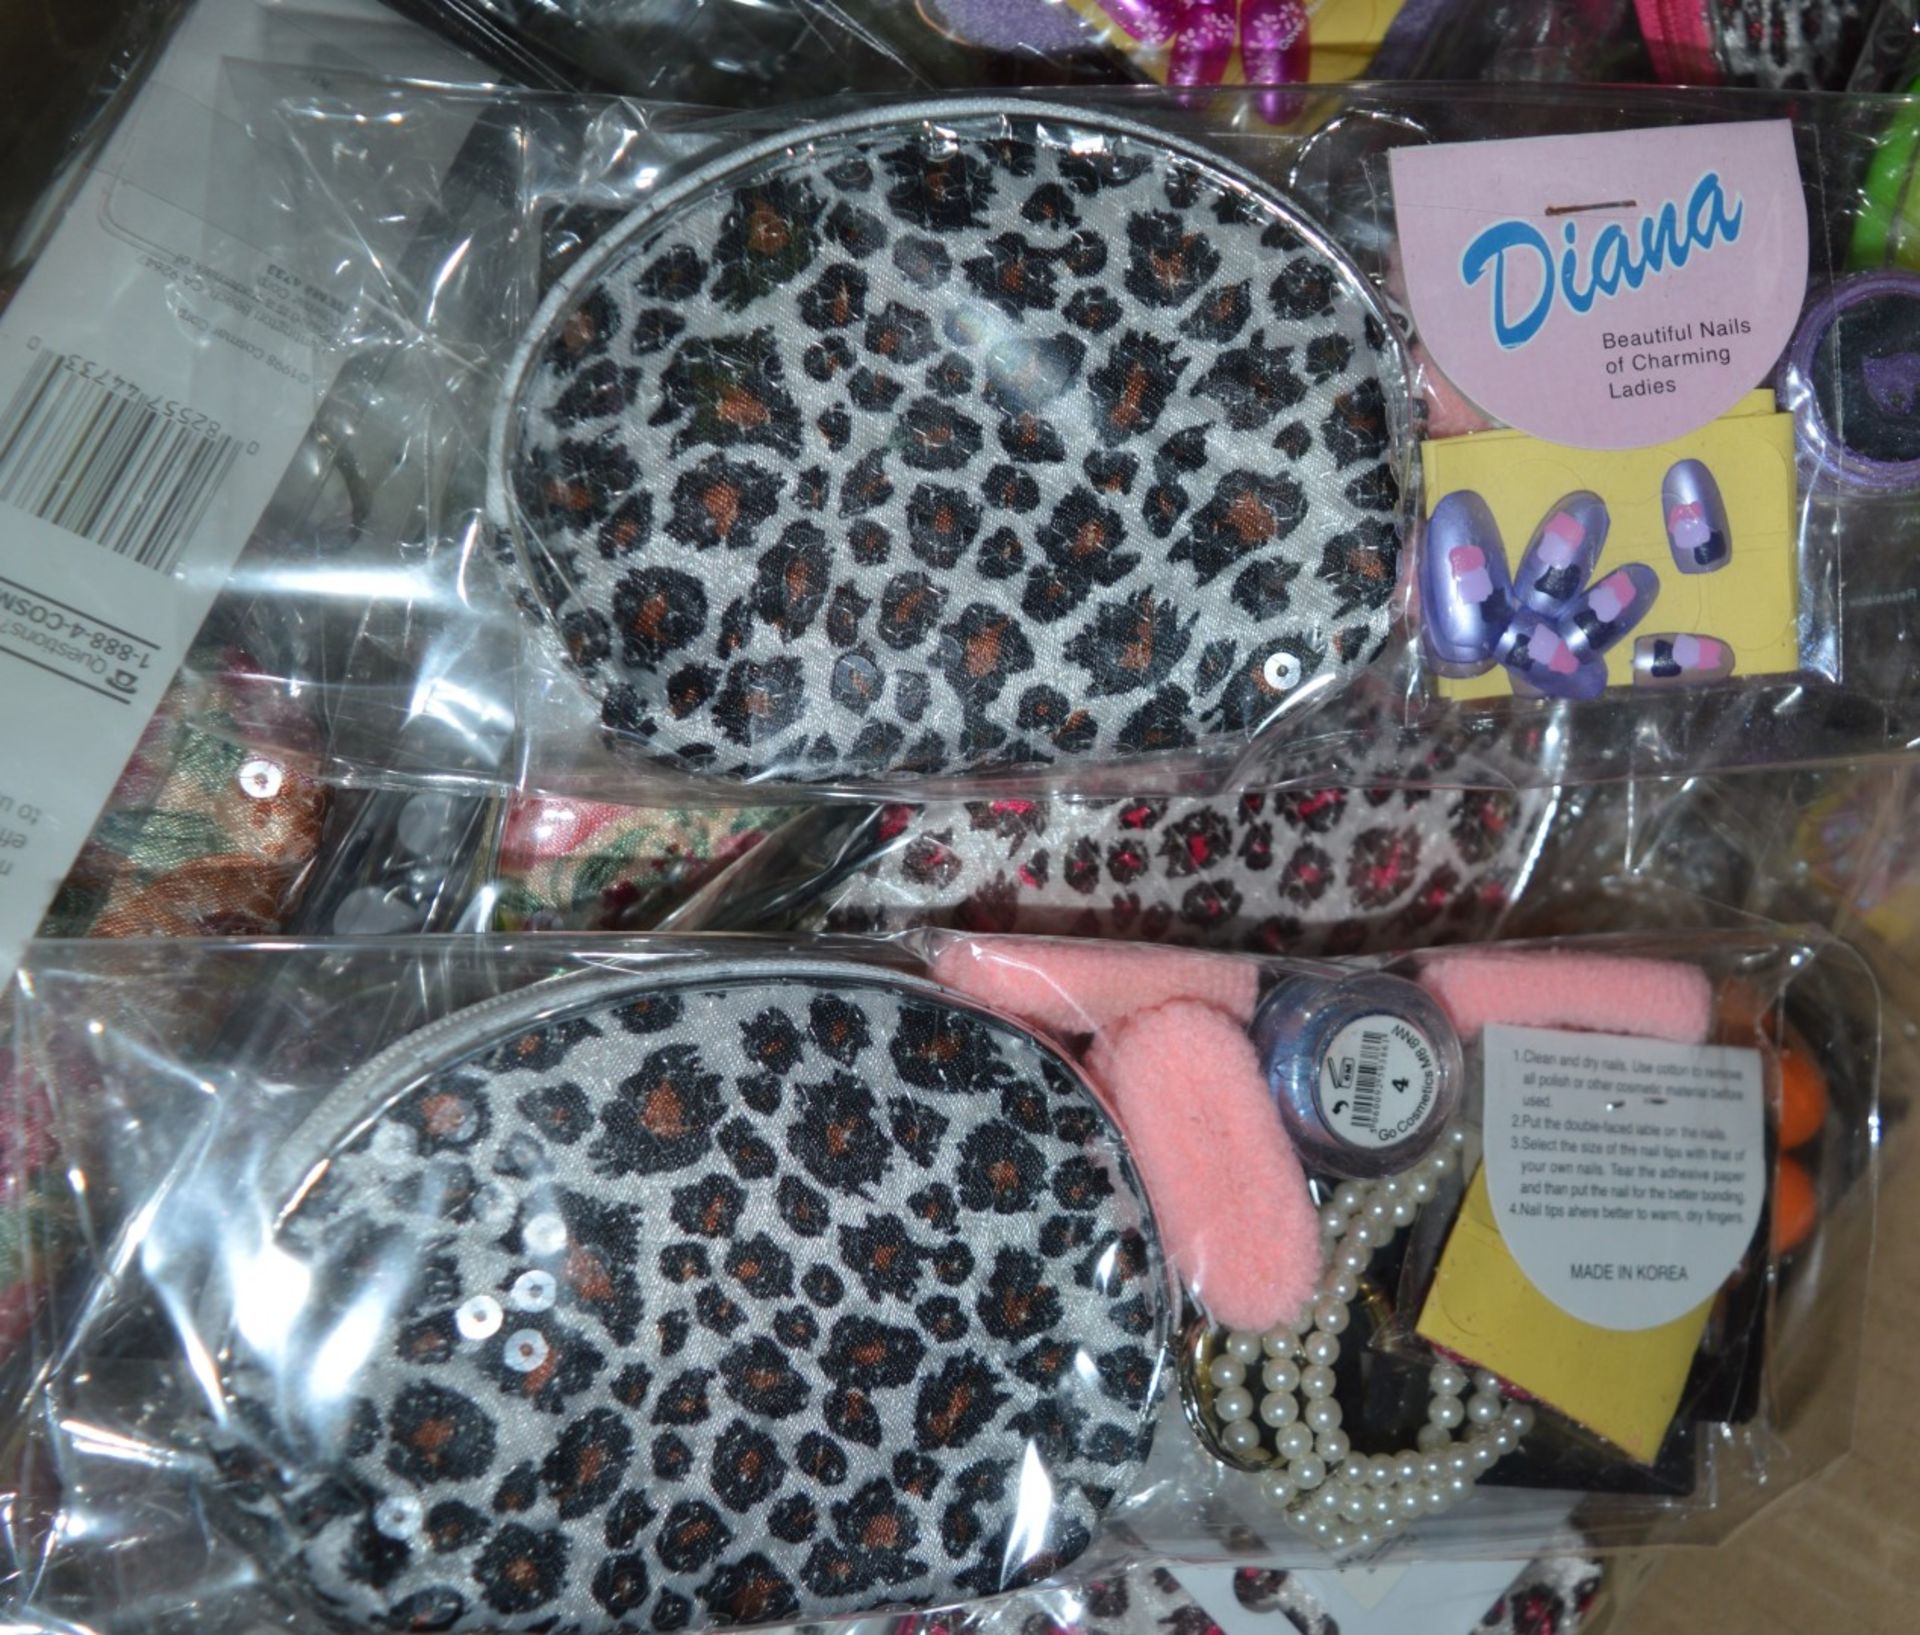 50 x Girls Beauty Gift Sets - Each Set Includes Items Such as a Stylish Purse, Ear Rings, Hair - Image 2 of 13